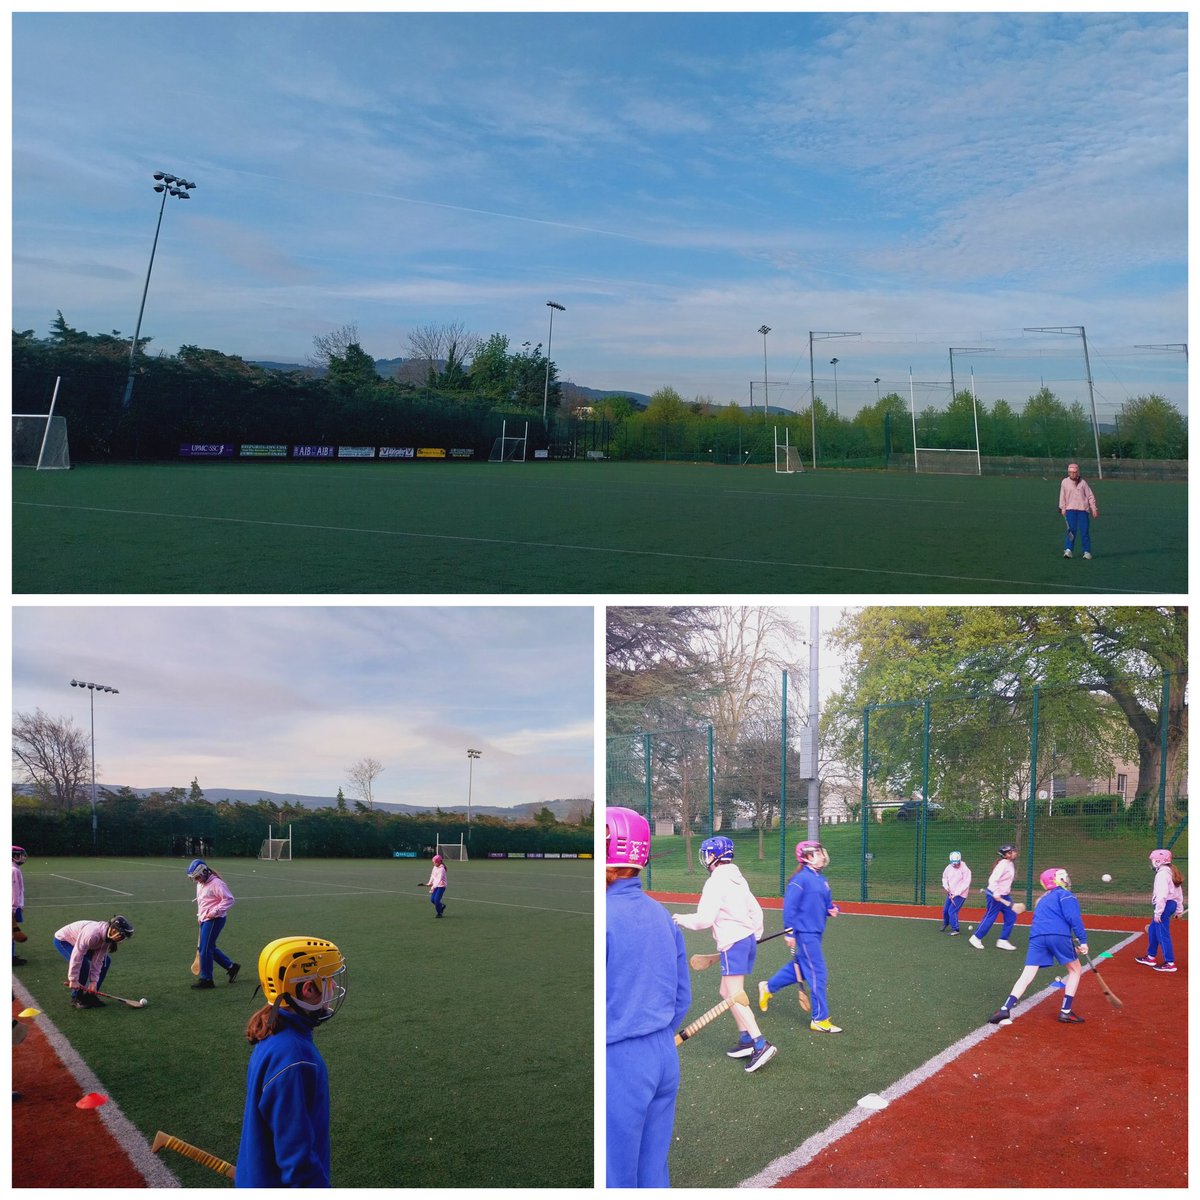 Nice to see the blue skies this morning in for our early morning training session! Next @CnmbDublin league match takes place on Wednesday at 3pm on the BBSE all weather pitch against St. Patrick's Hollypark. 
All support welcome!